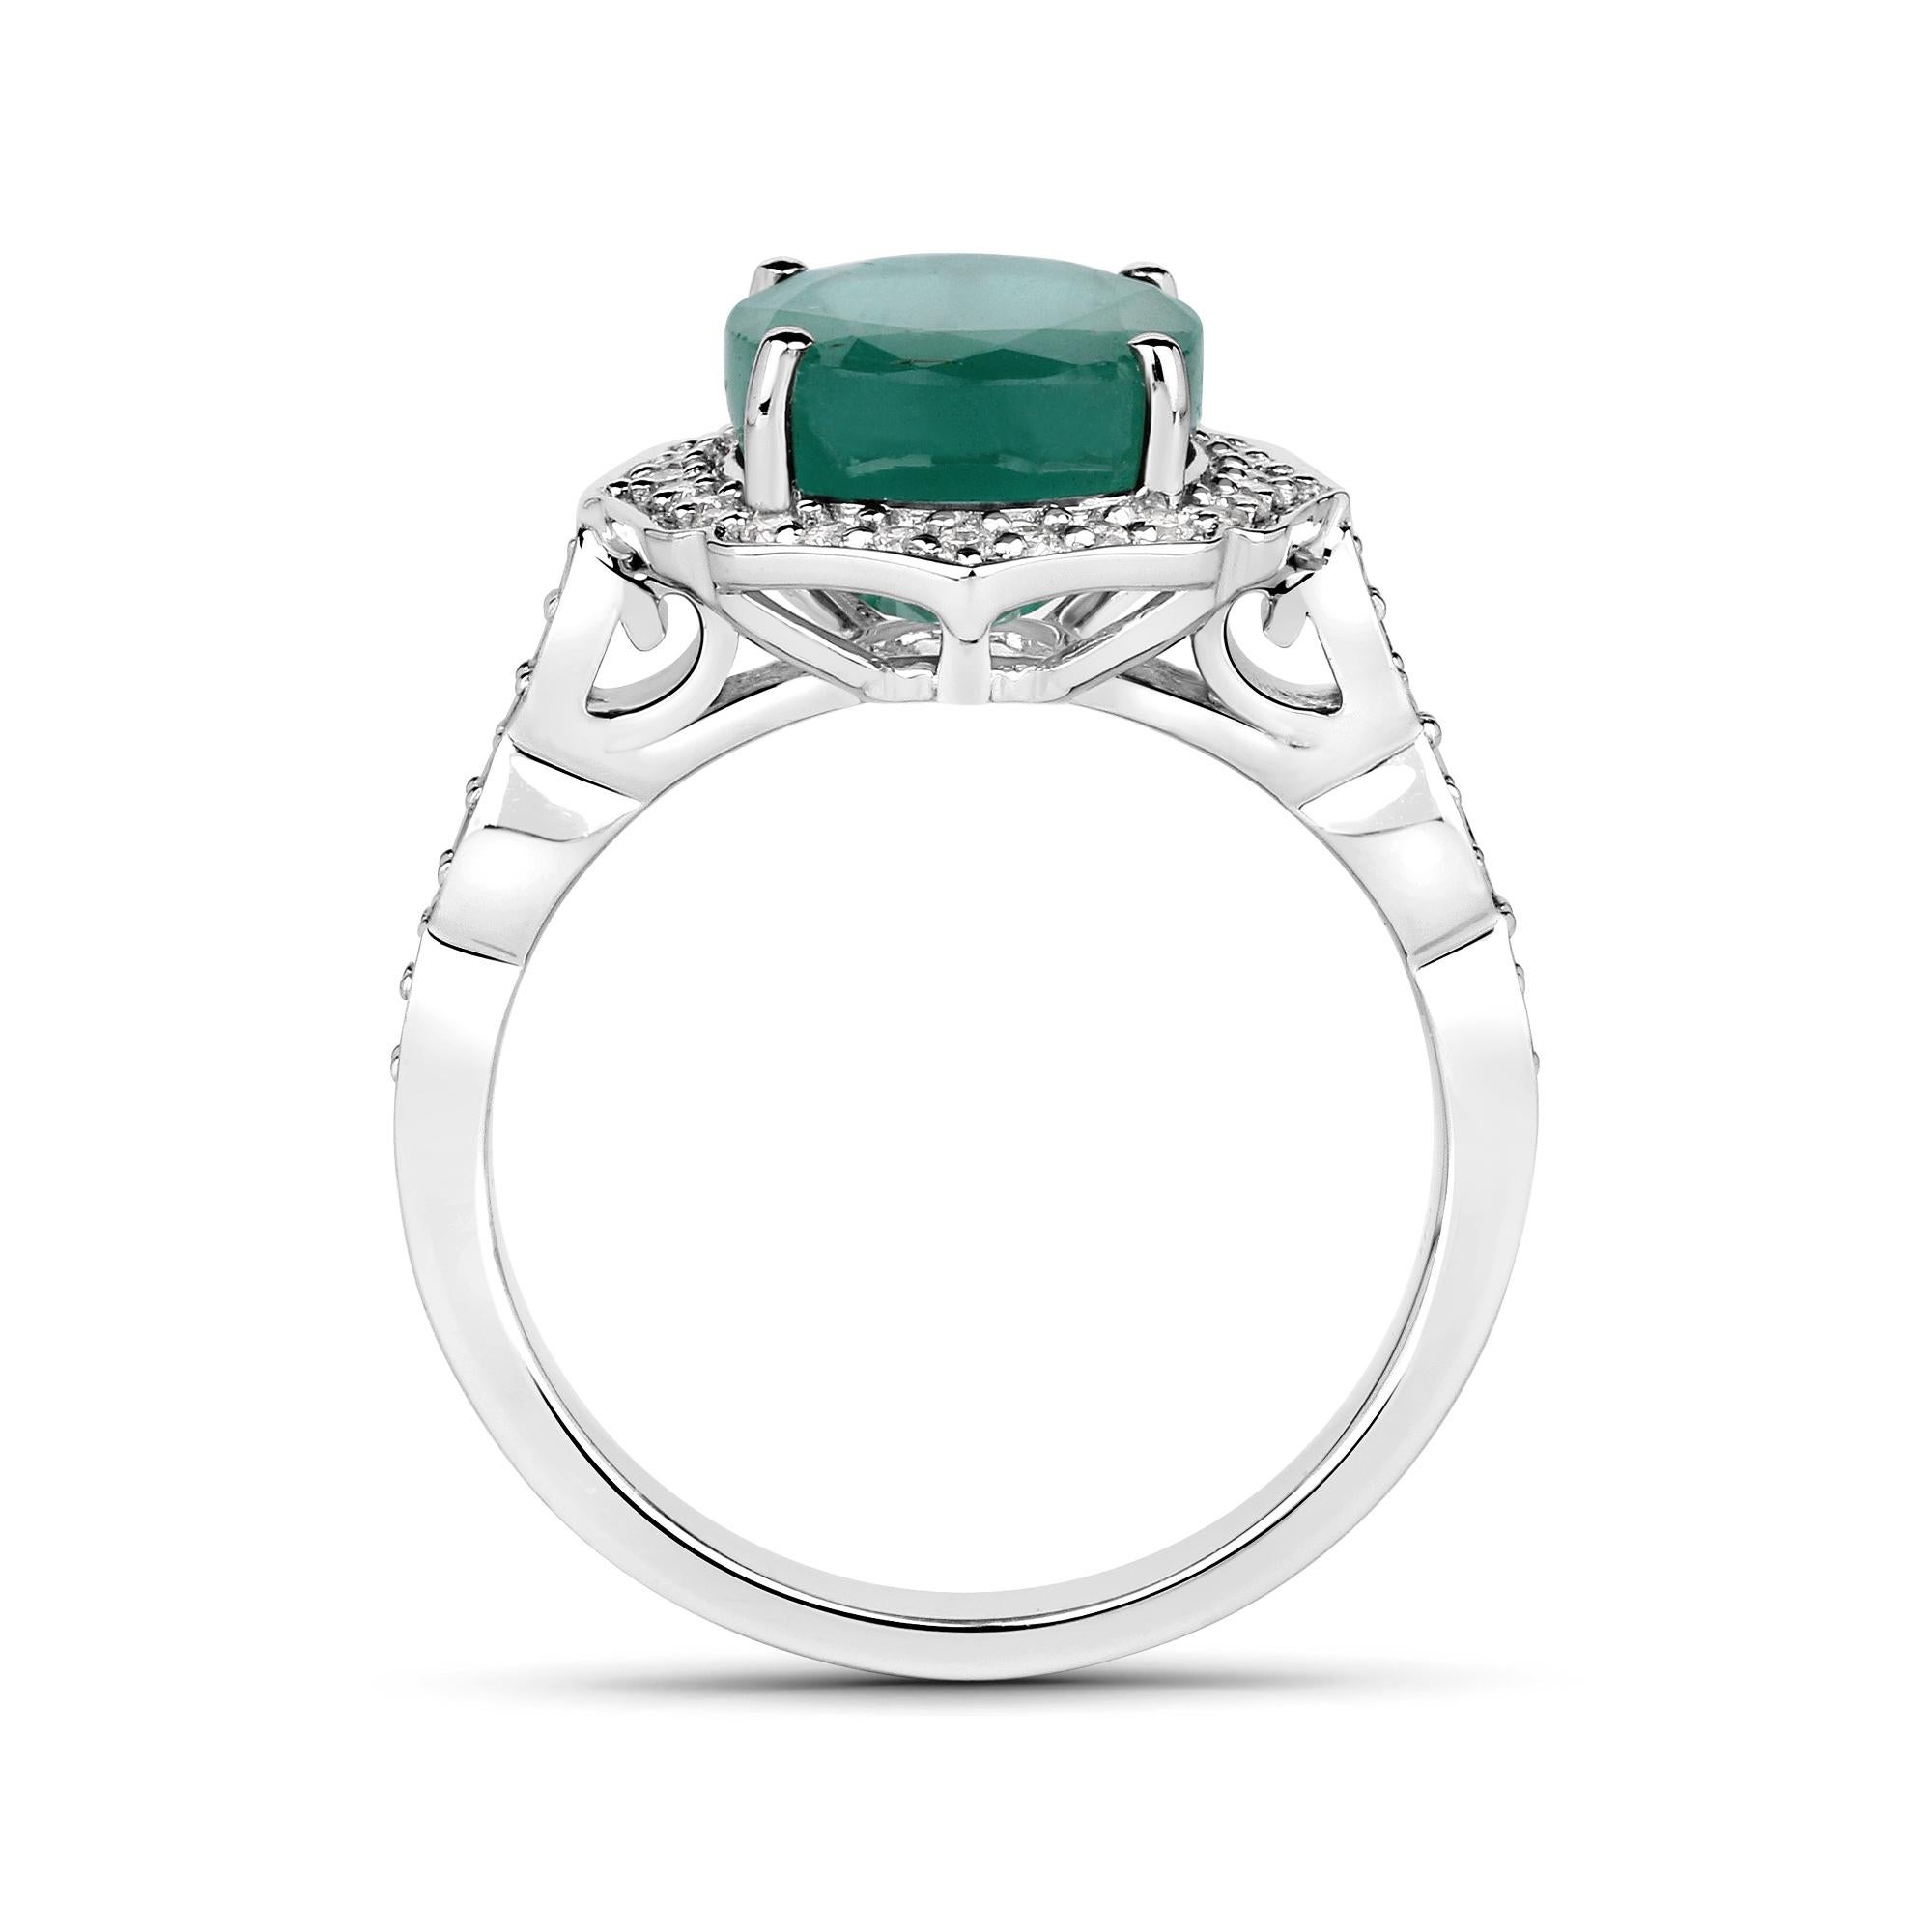 Contemporary 4.30 Carat Brazilian Emerald and Diamond 14 Karat White Gold Cocktail Ring For Sale